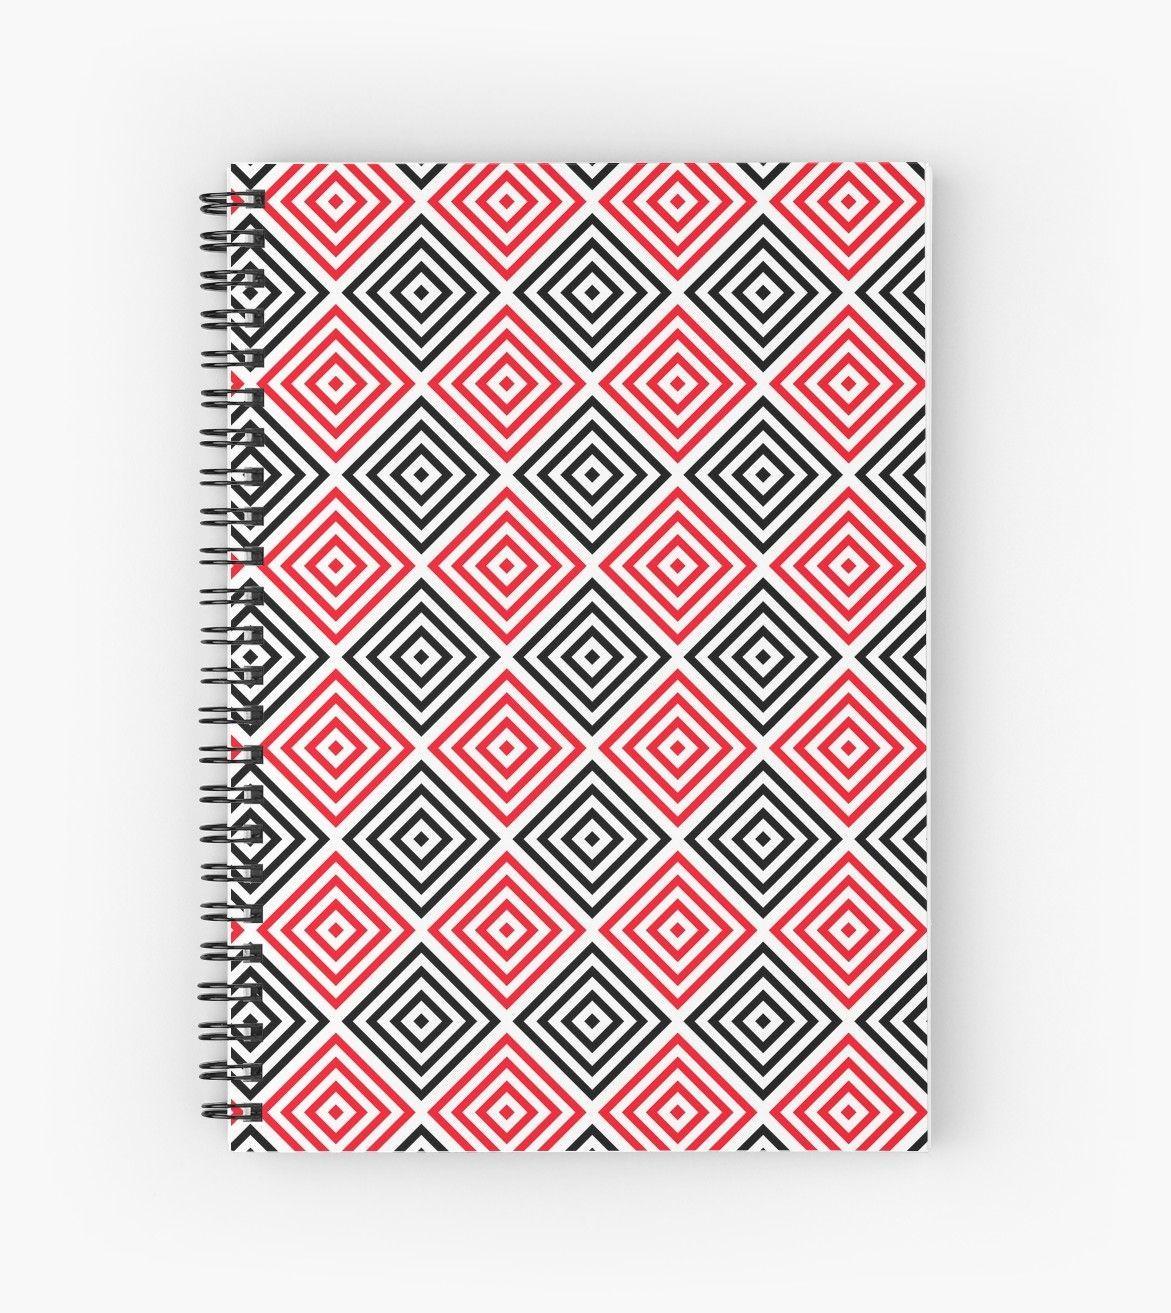 Red Black and White Diamond Rectangle Logo - Black, red and white diamond rhombus pattern' Spiral Notebook by ...